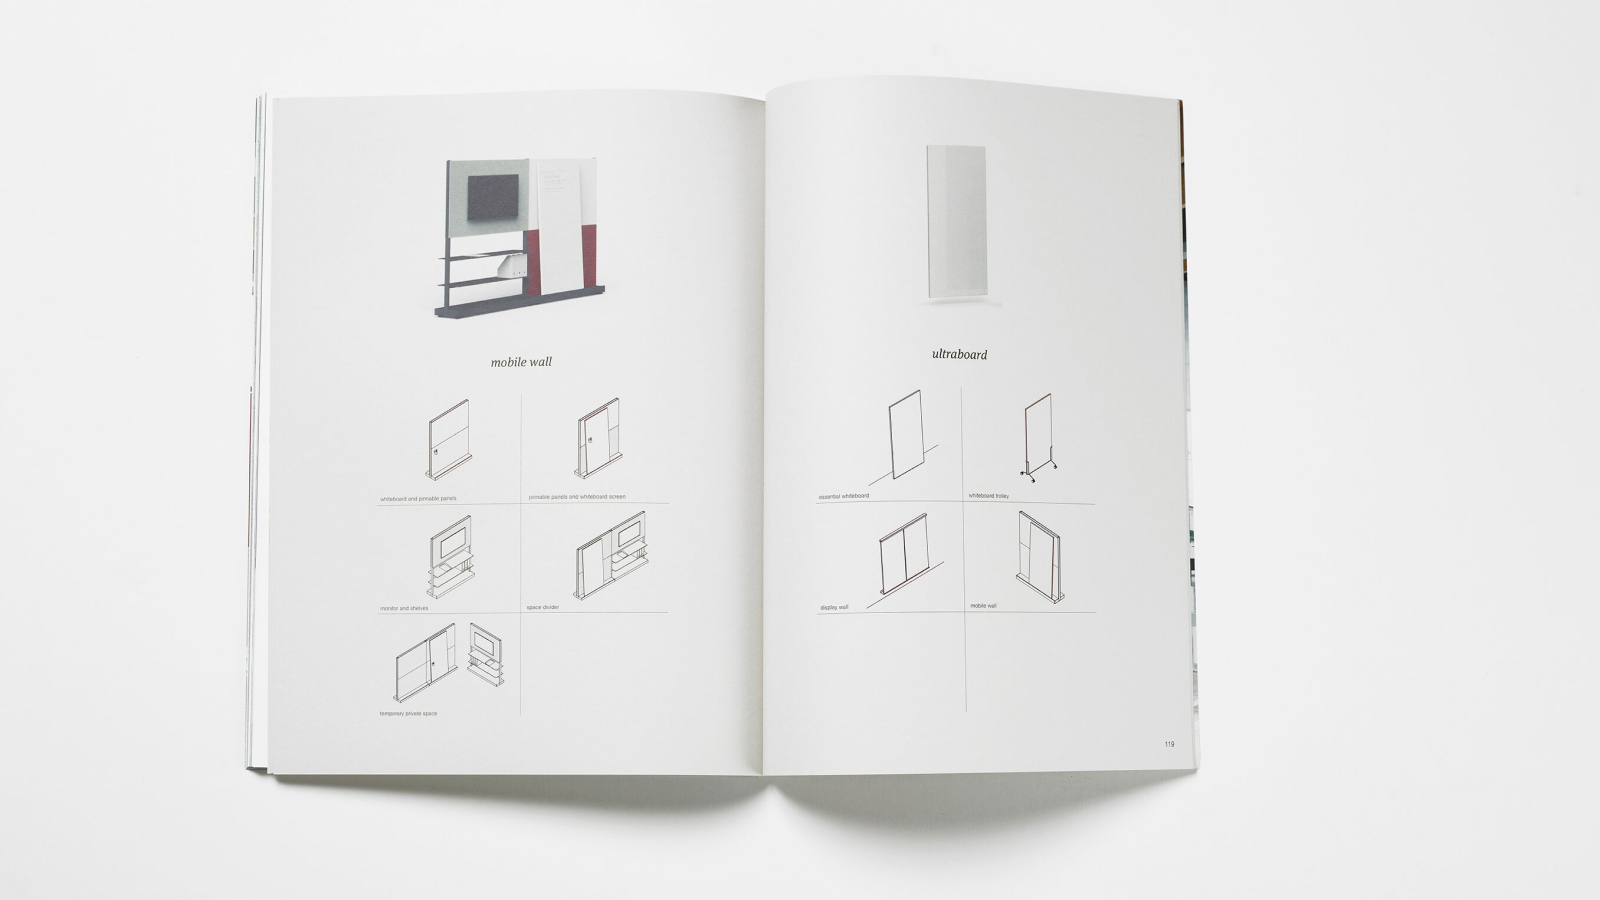 An image of pages from the Horizon design magazine featuring products that would become the OE1 Workspace Collection.